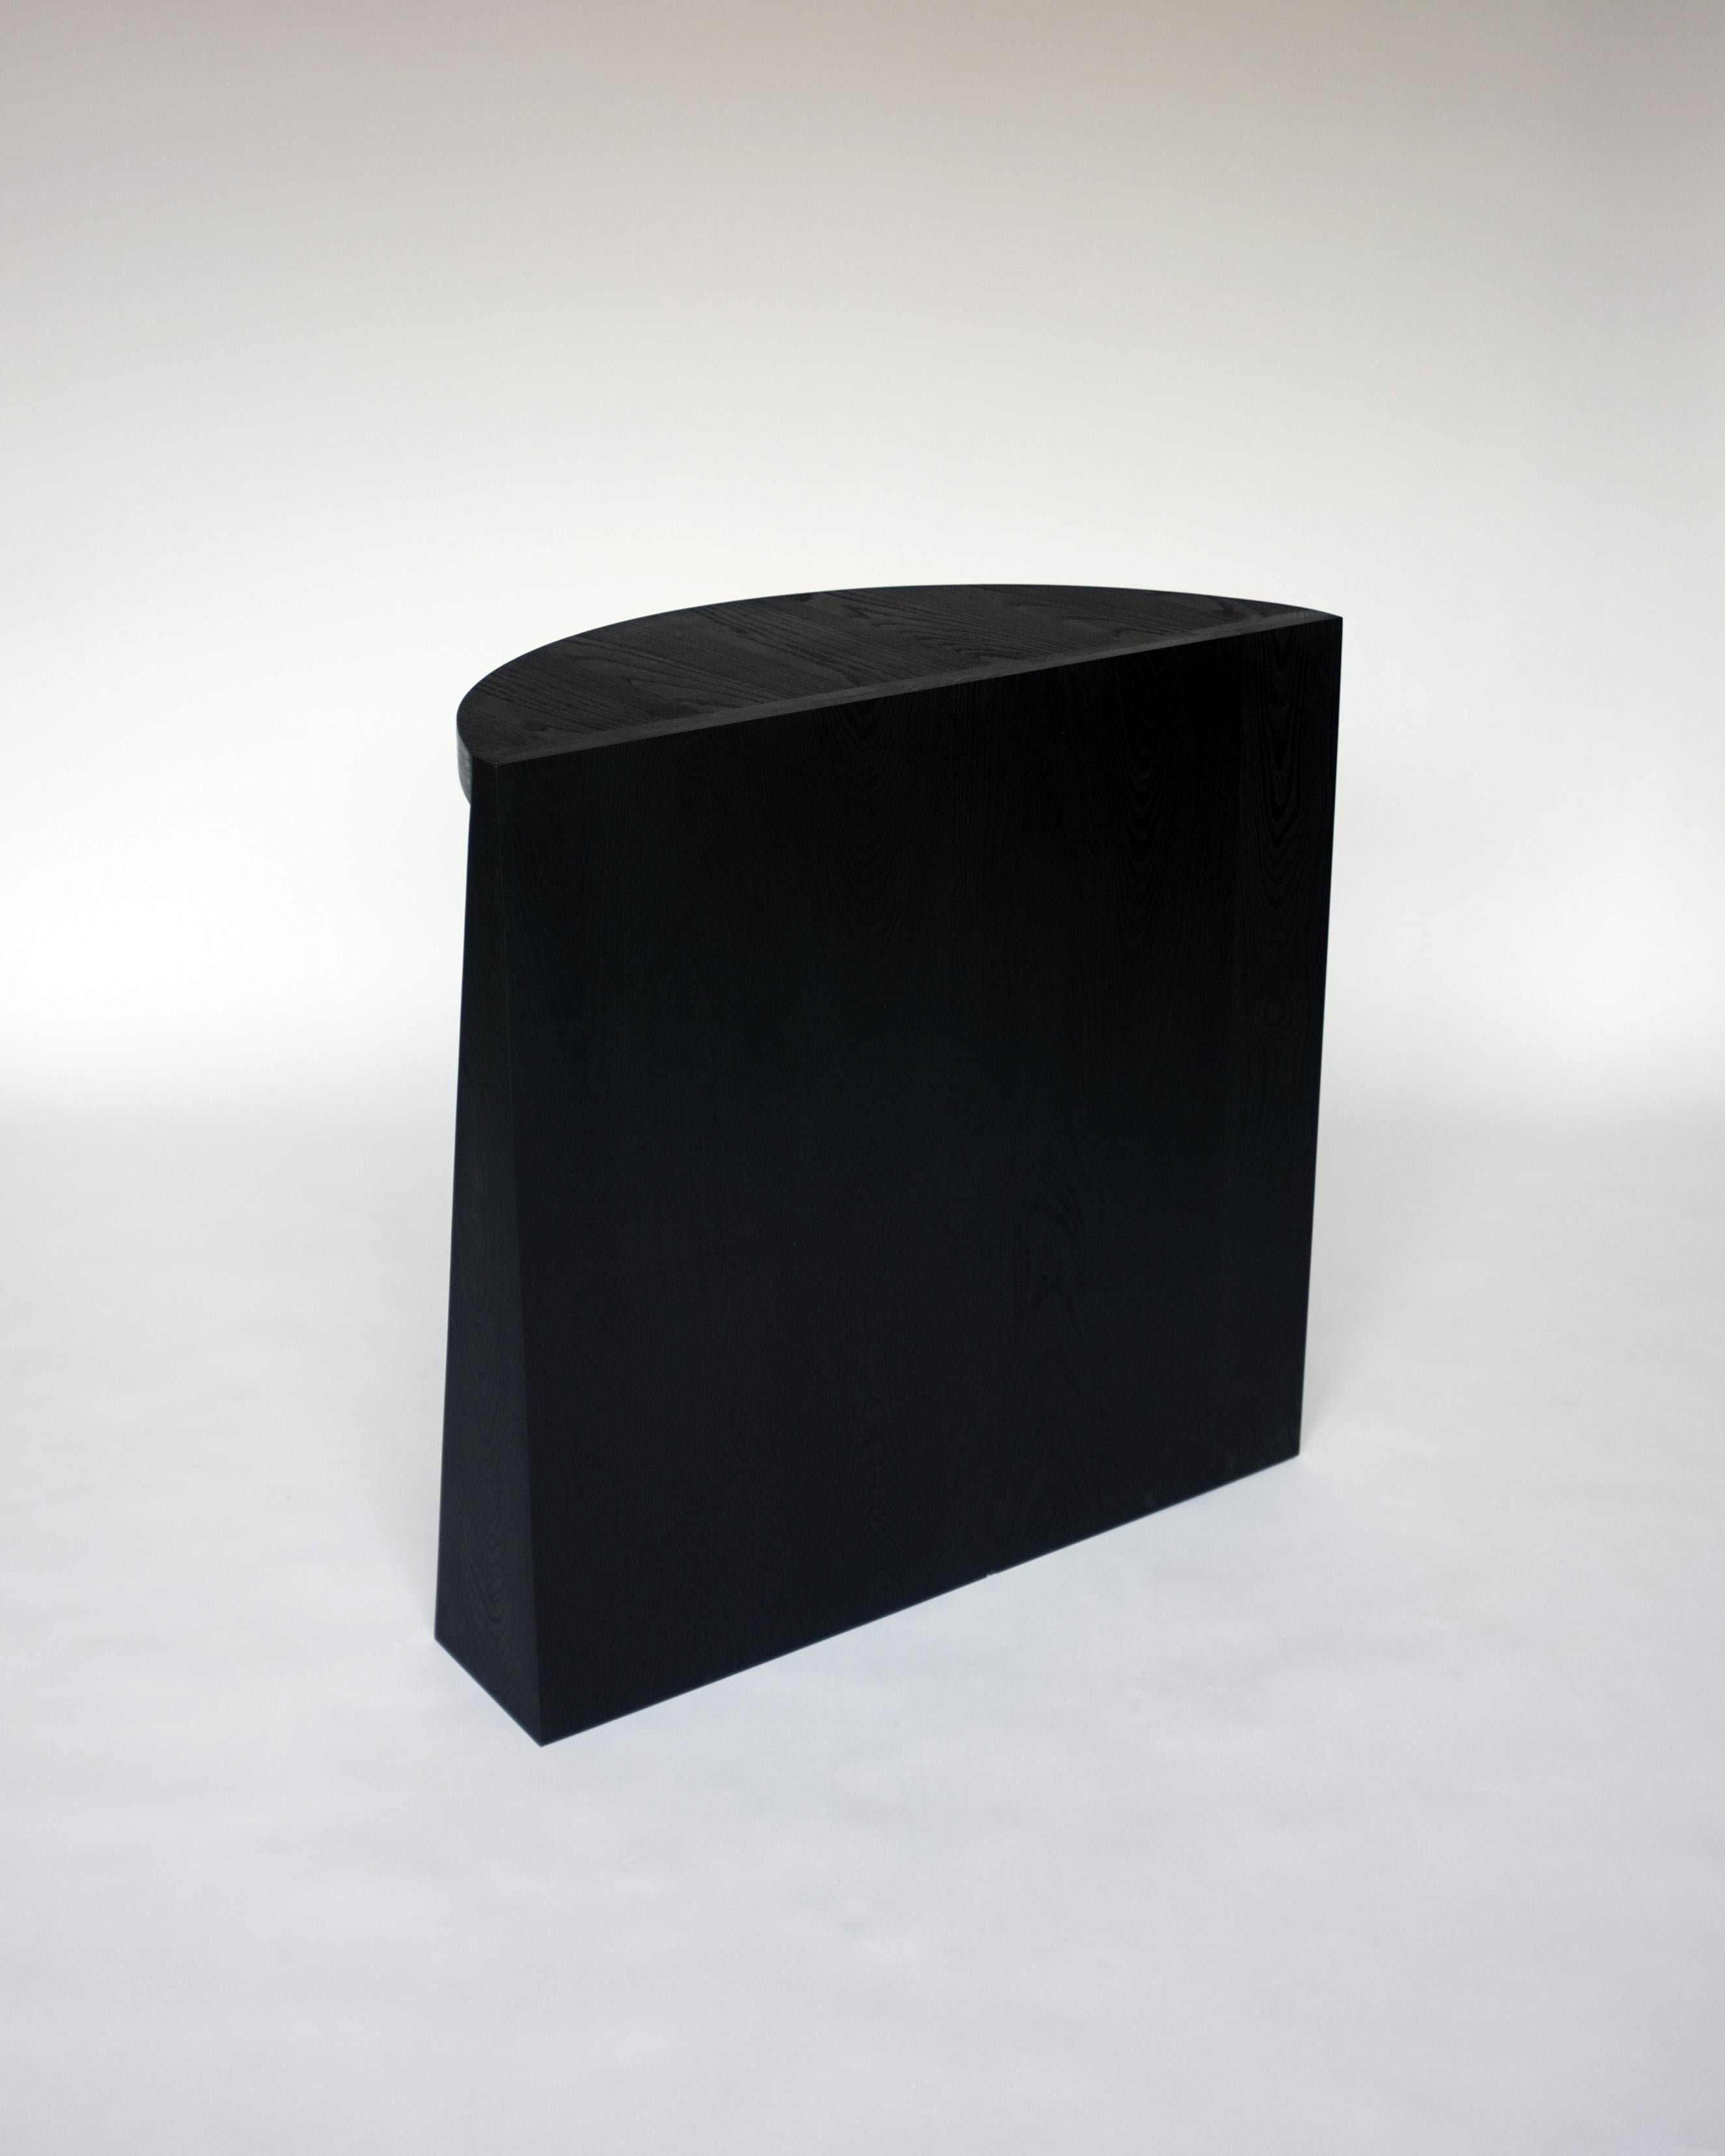 Blackened Minimal Sculptural Geometric Black Dyed Ash Wood Console Table by Campagna